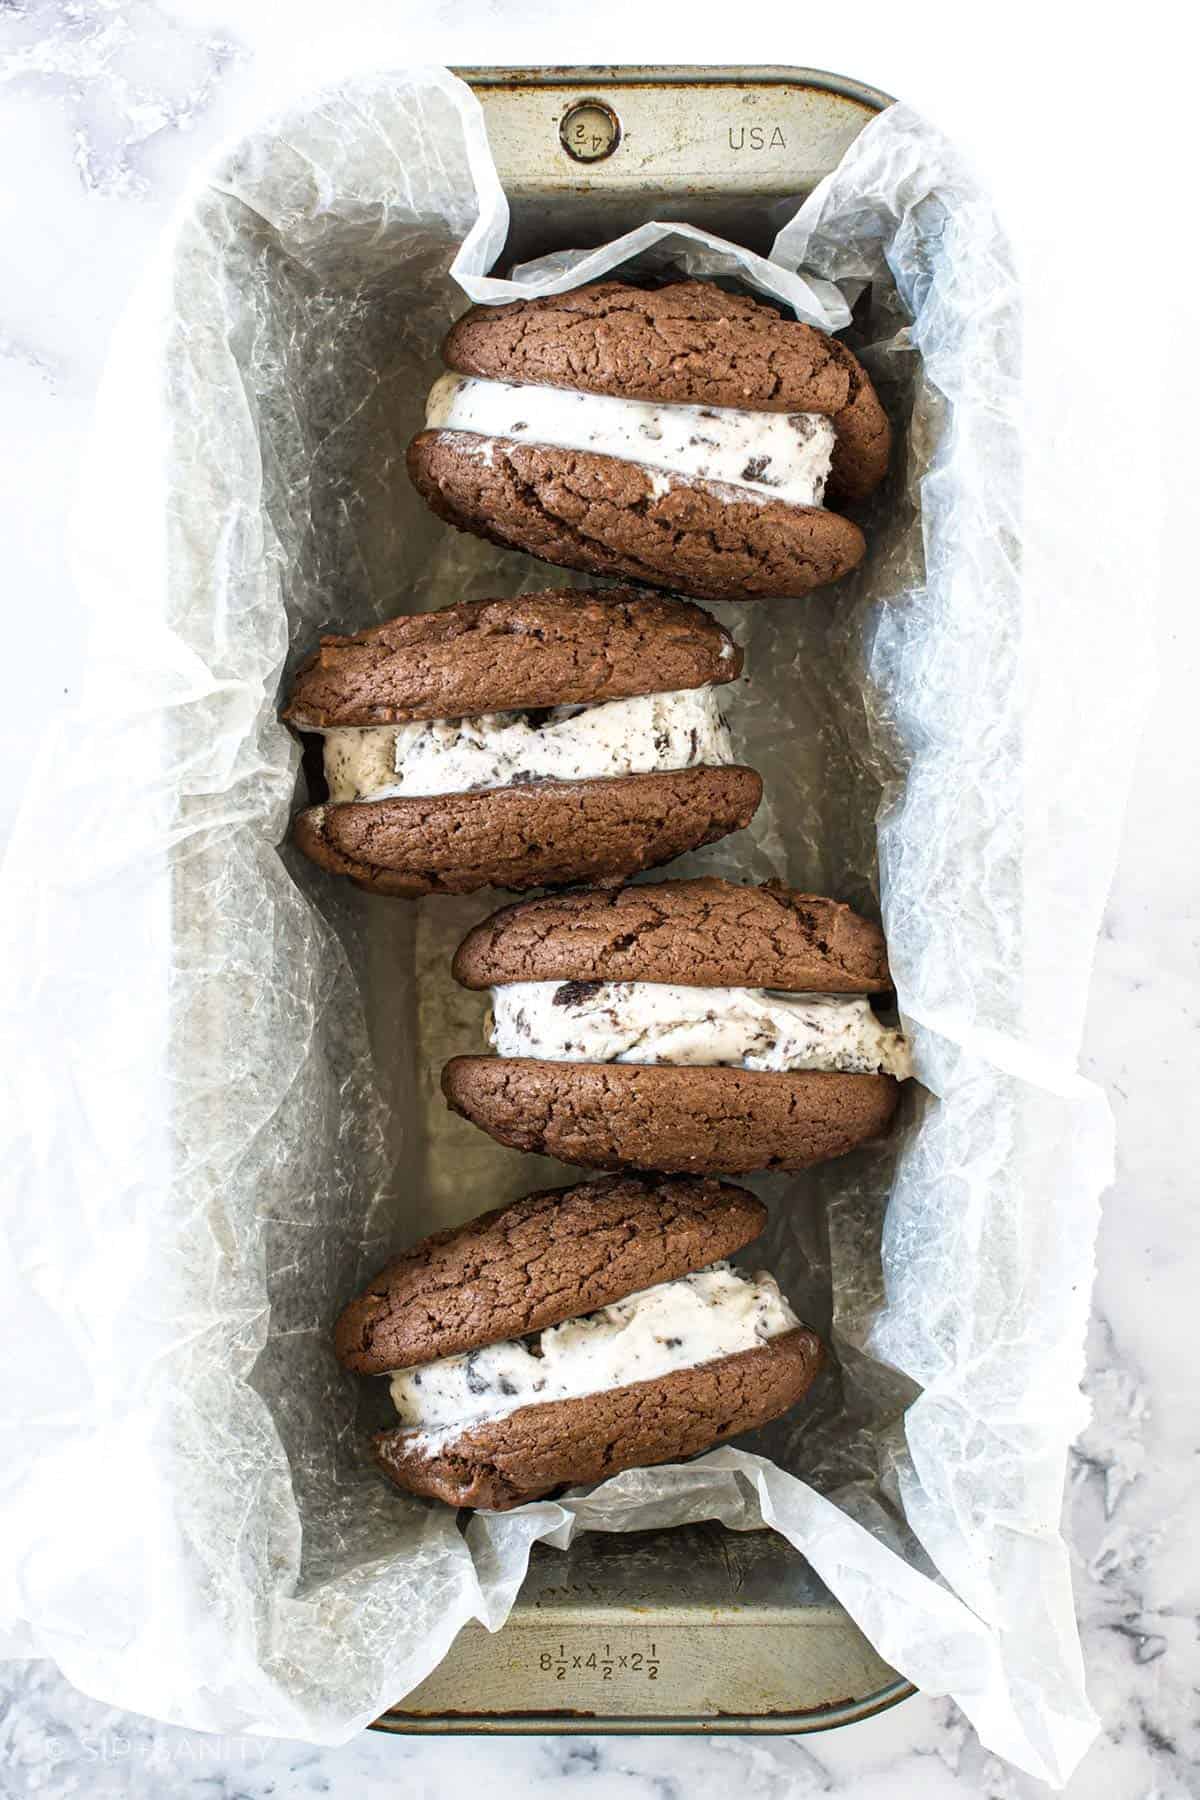 Four cookie ice cream sandwiches in a wax paper lined tin.